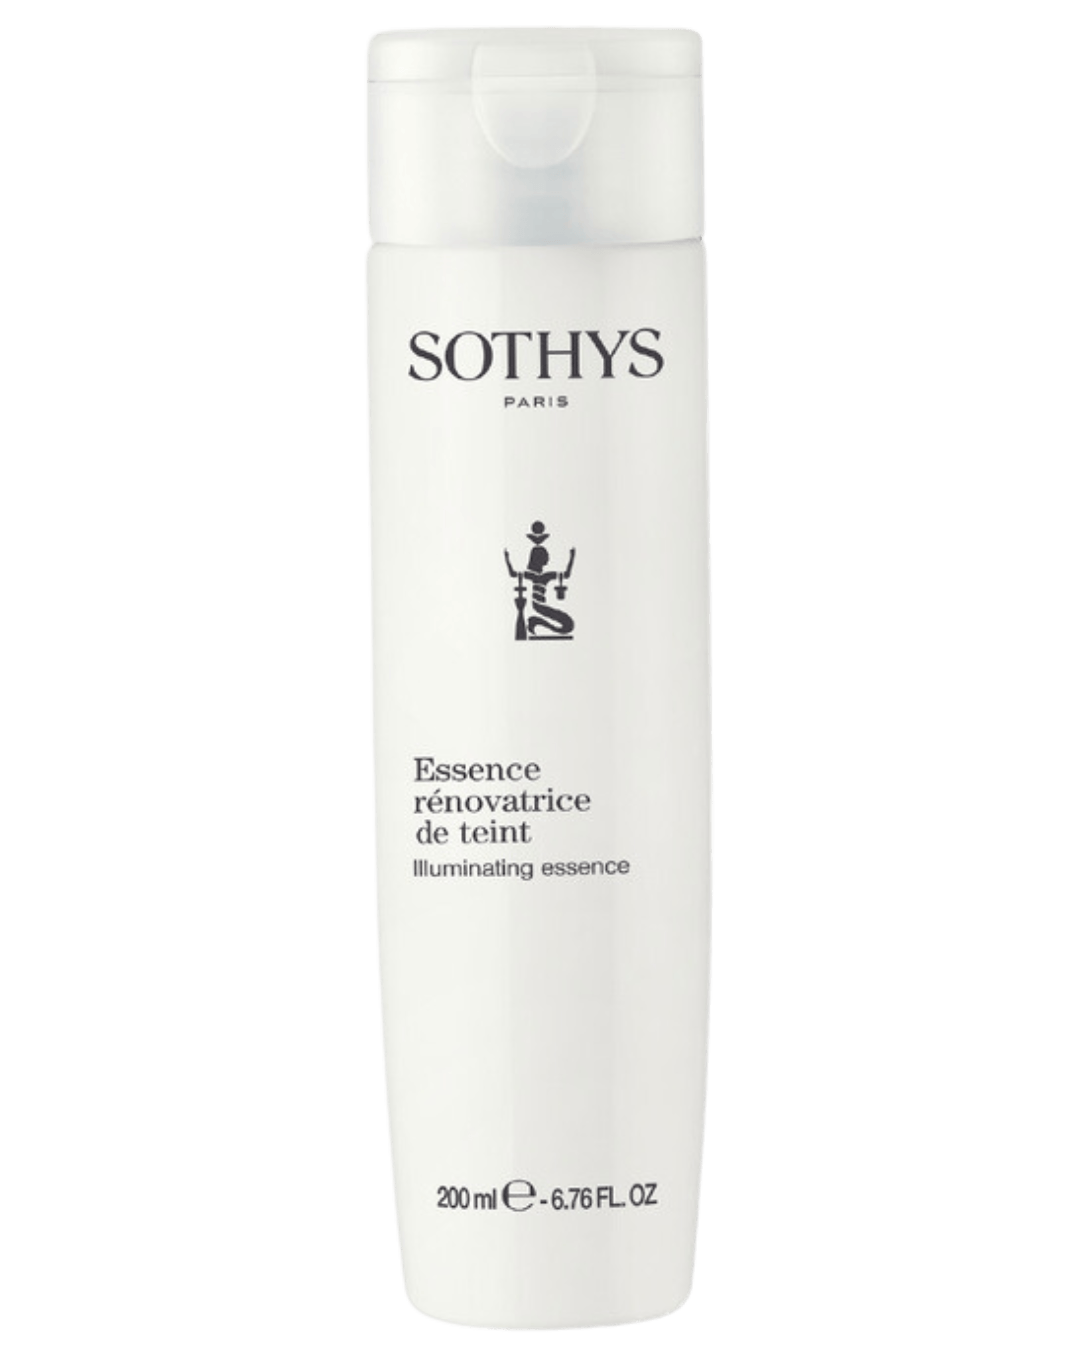 Daily Vanity Beauty Awards 2024 Best Skincare Sothys Illuminating Essence Voted By Beauty Experts